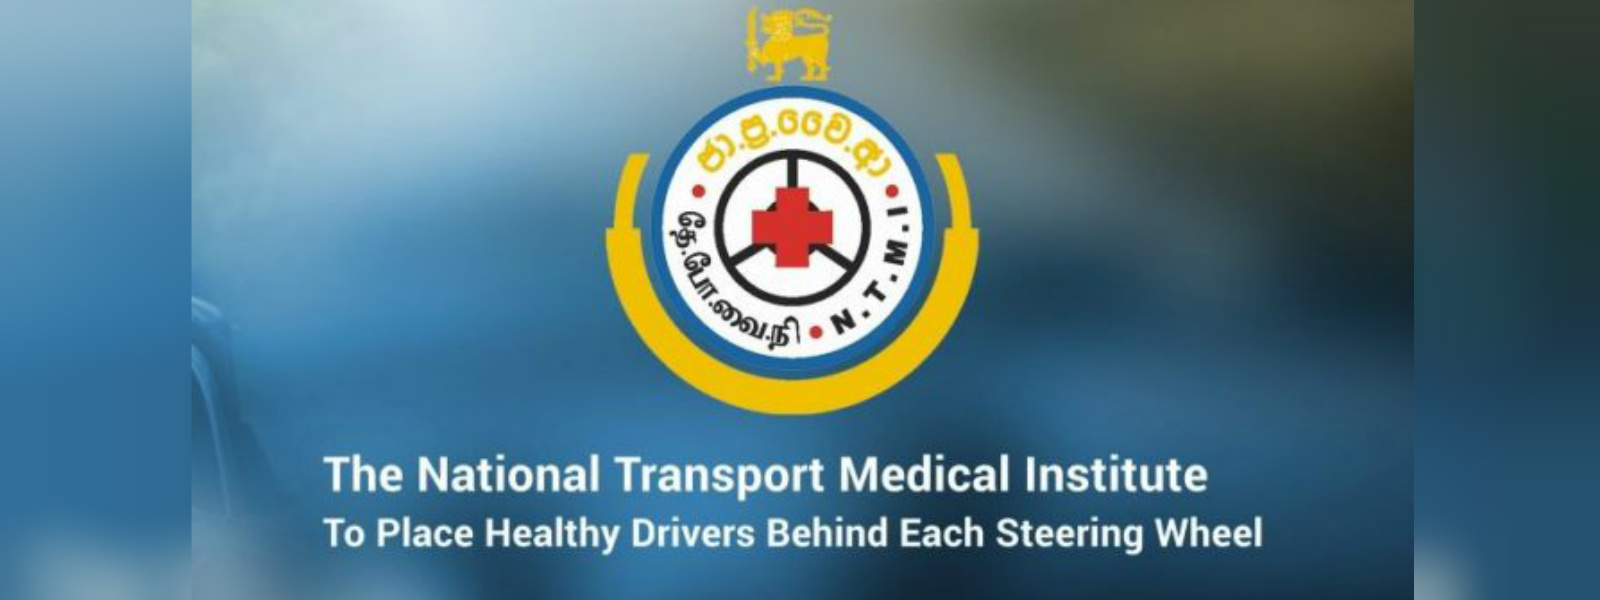 National Transport Medical Institute closed on Friday & Saturday